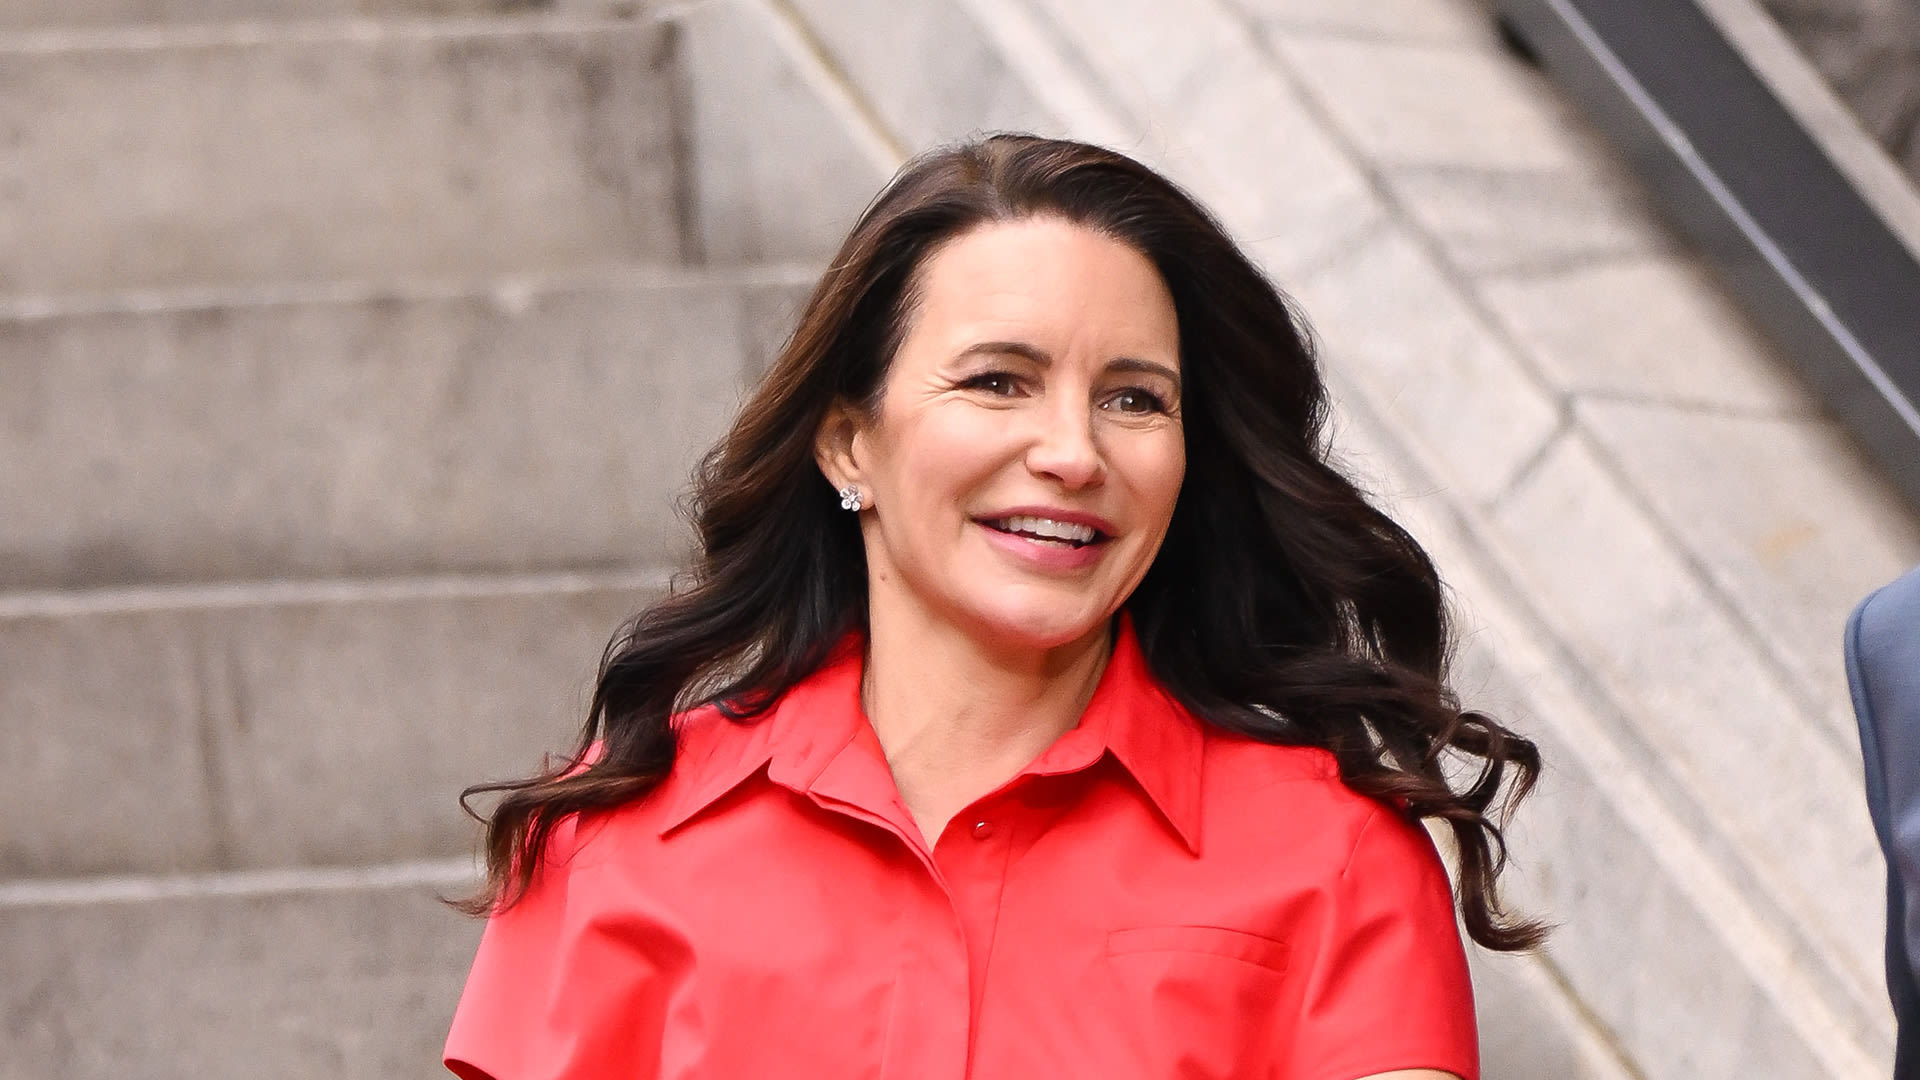 Kristin Davis praised for showing ‘natural’ beauty after removing fillers